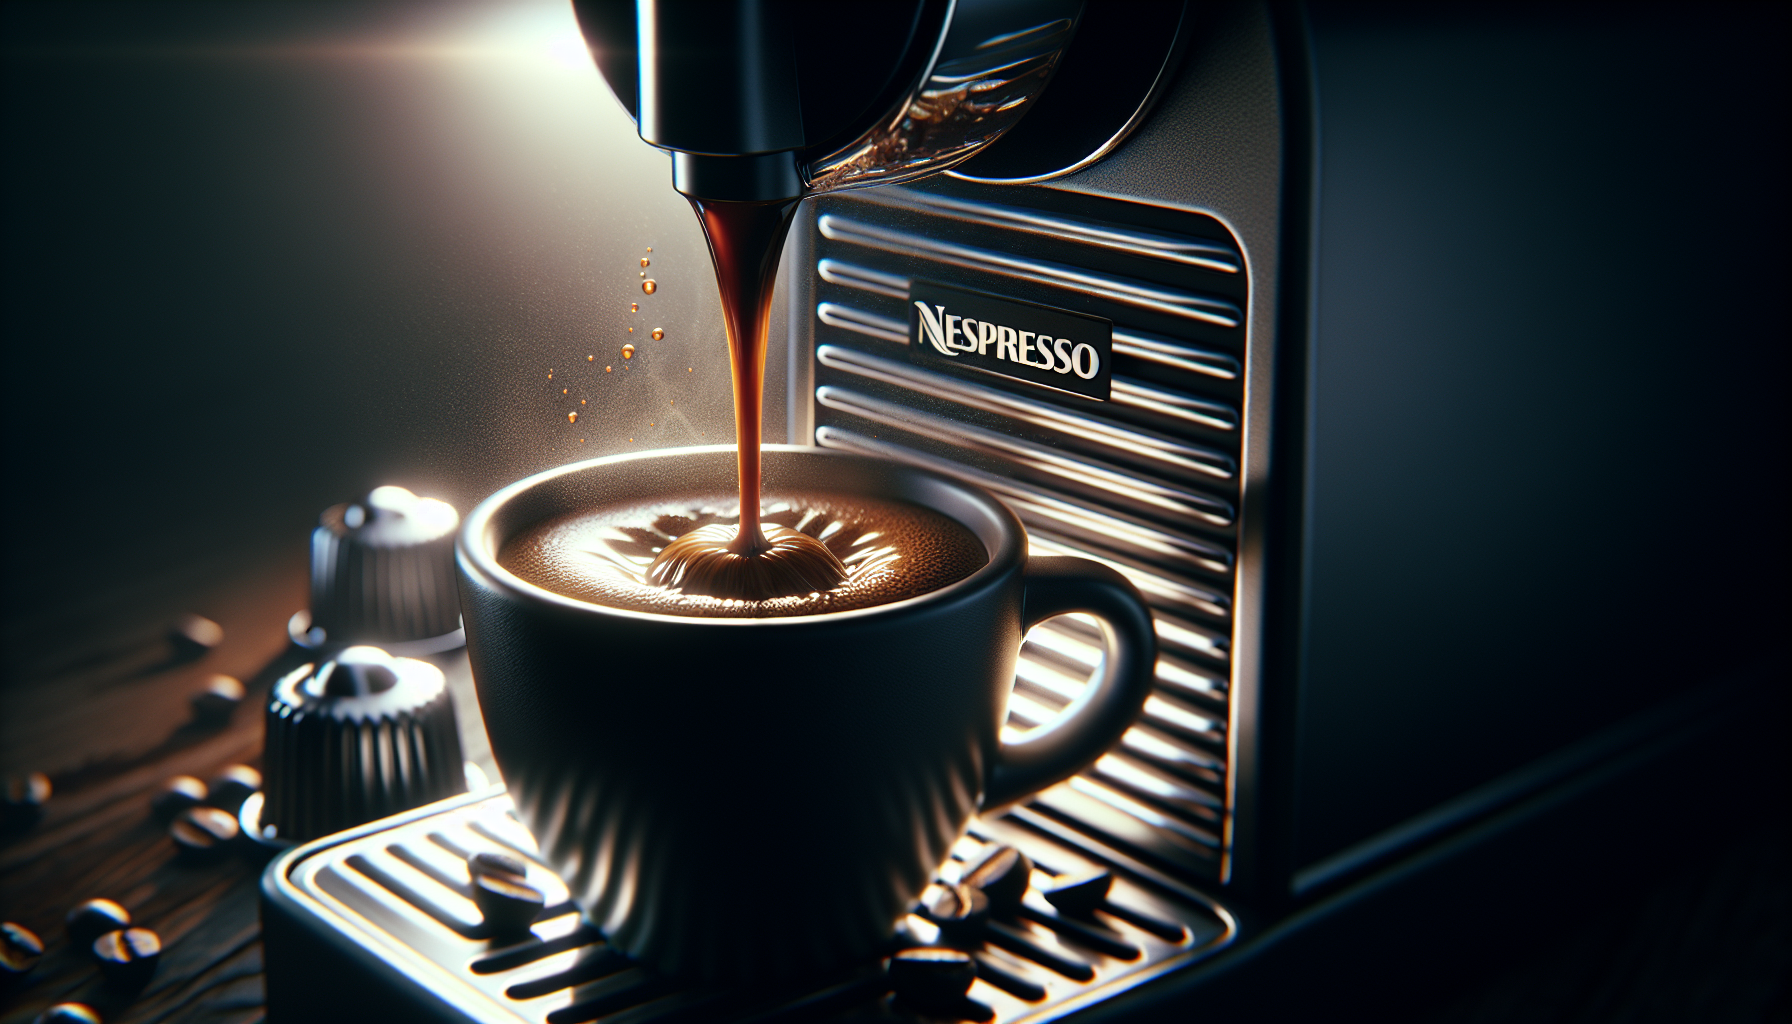 Is Nespresso Coffee Actually Good?